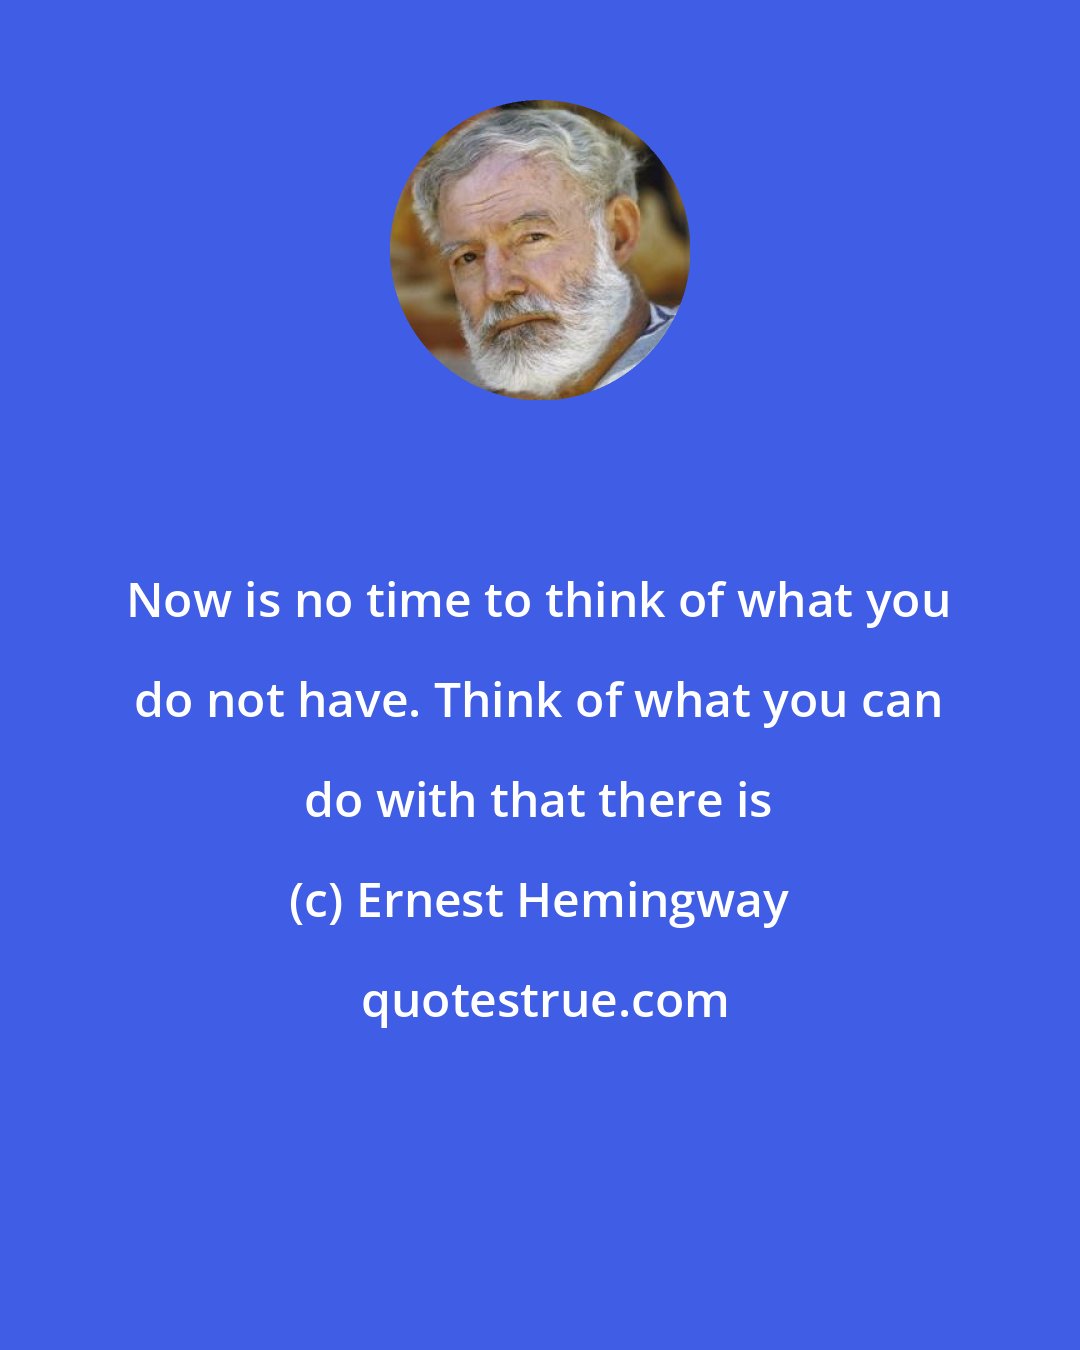 Ernest Hemingway: Now is no time to think of what you do not have. Think of what you can do with that there is